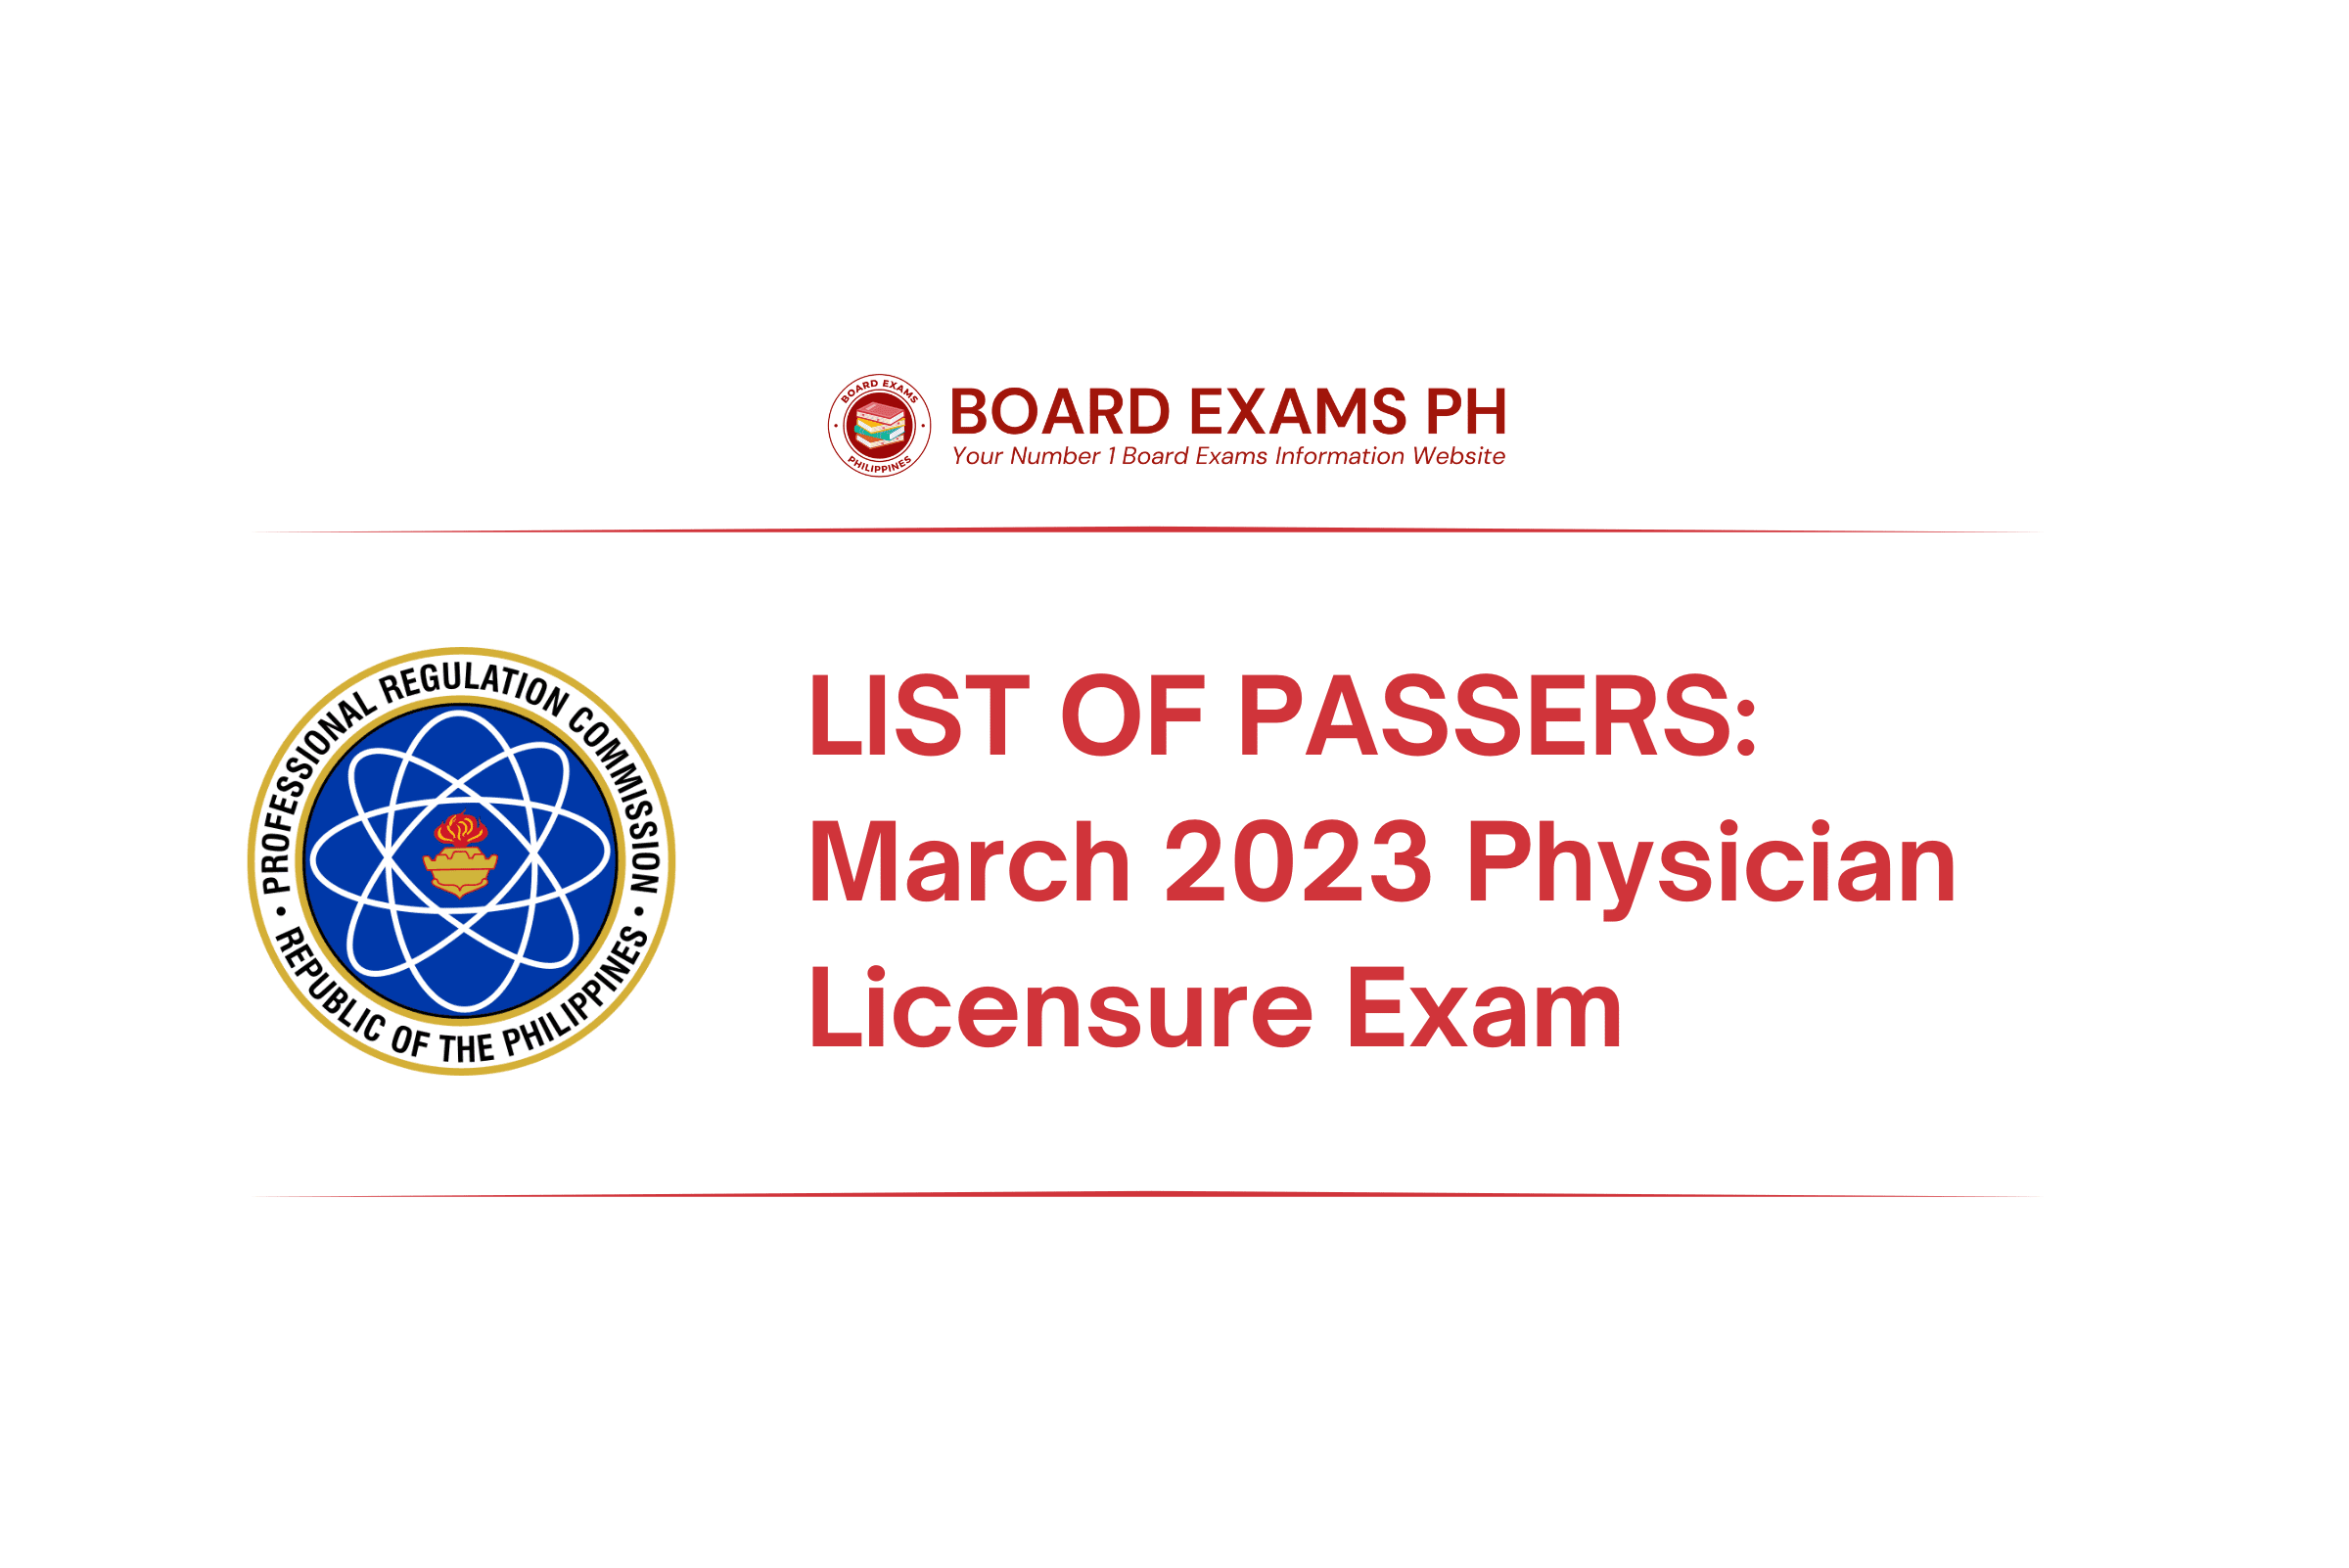 LIST OF PASSERS March 2023 Physician Licensure Exam (PLE) Board Exams PH